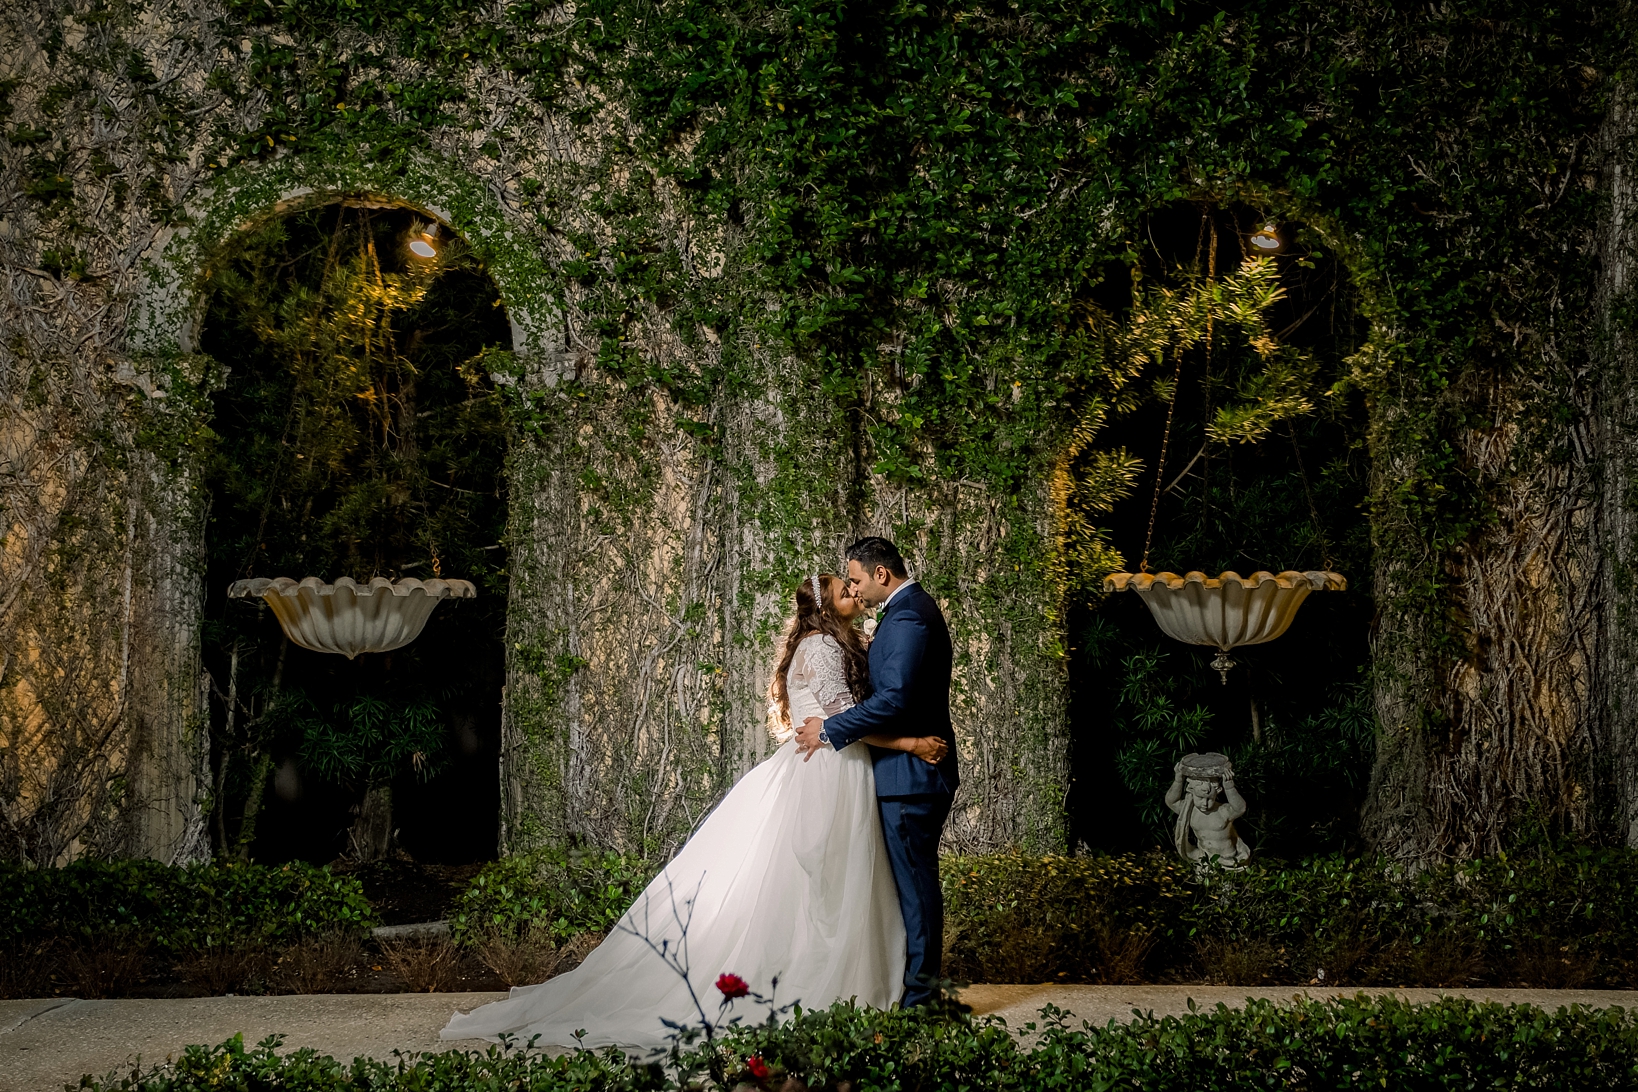 An amazing nighttime portrait against all the lush greenery of the Kapok Tree in Clearwater, FL by Sarah & Ben Photography